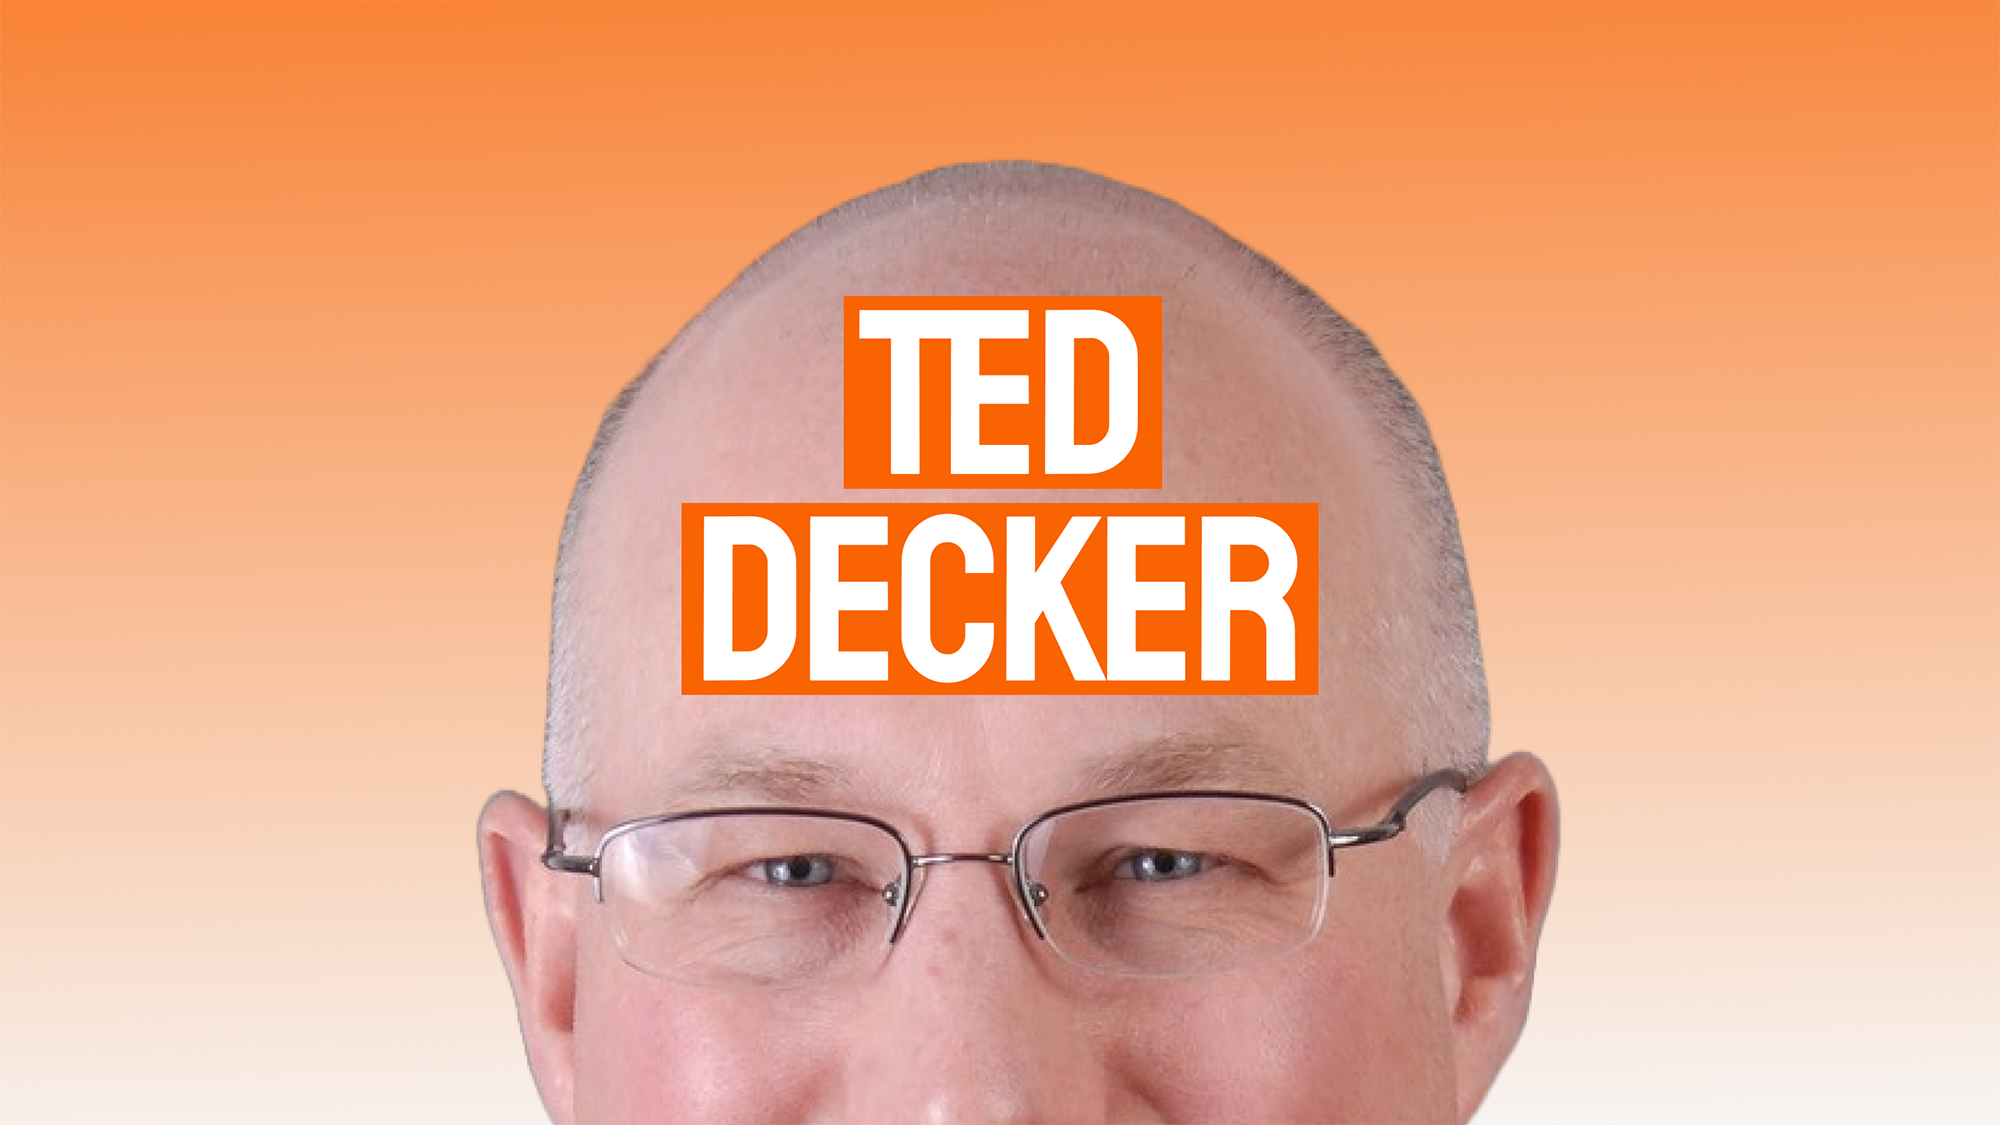 Ted Decker, CEO at The Home Depot